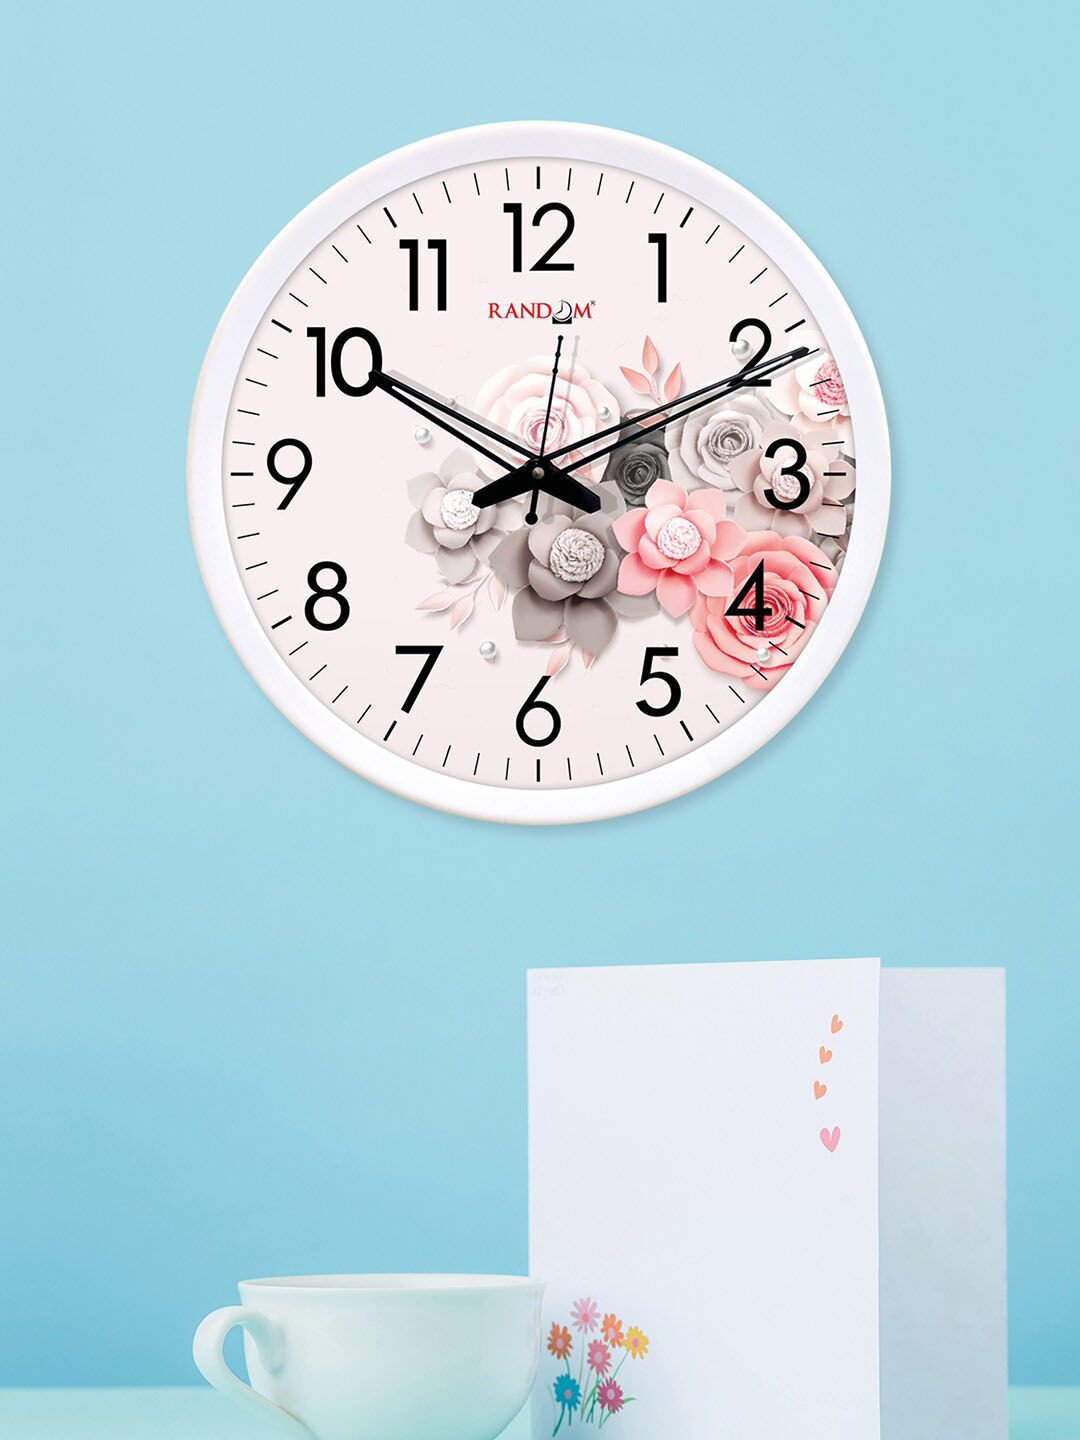 RANDOM White & Pink Floral Printed 30 cm Analogue Wall Clock Price in India